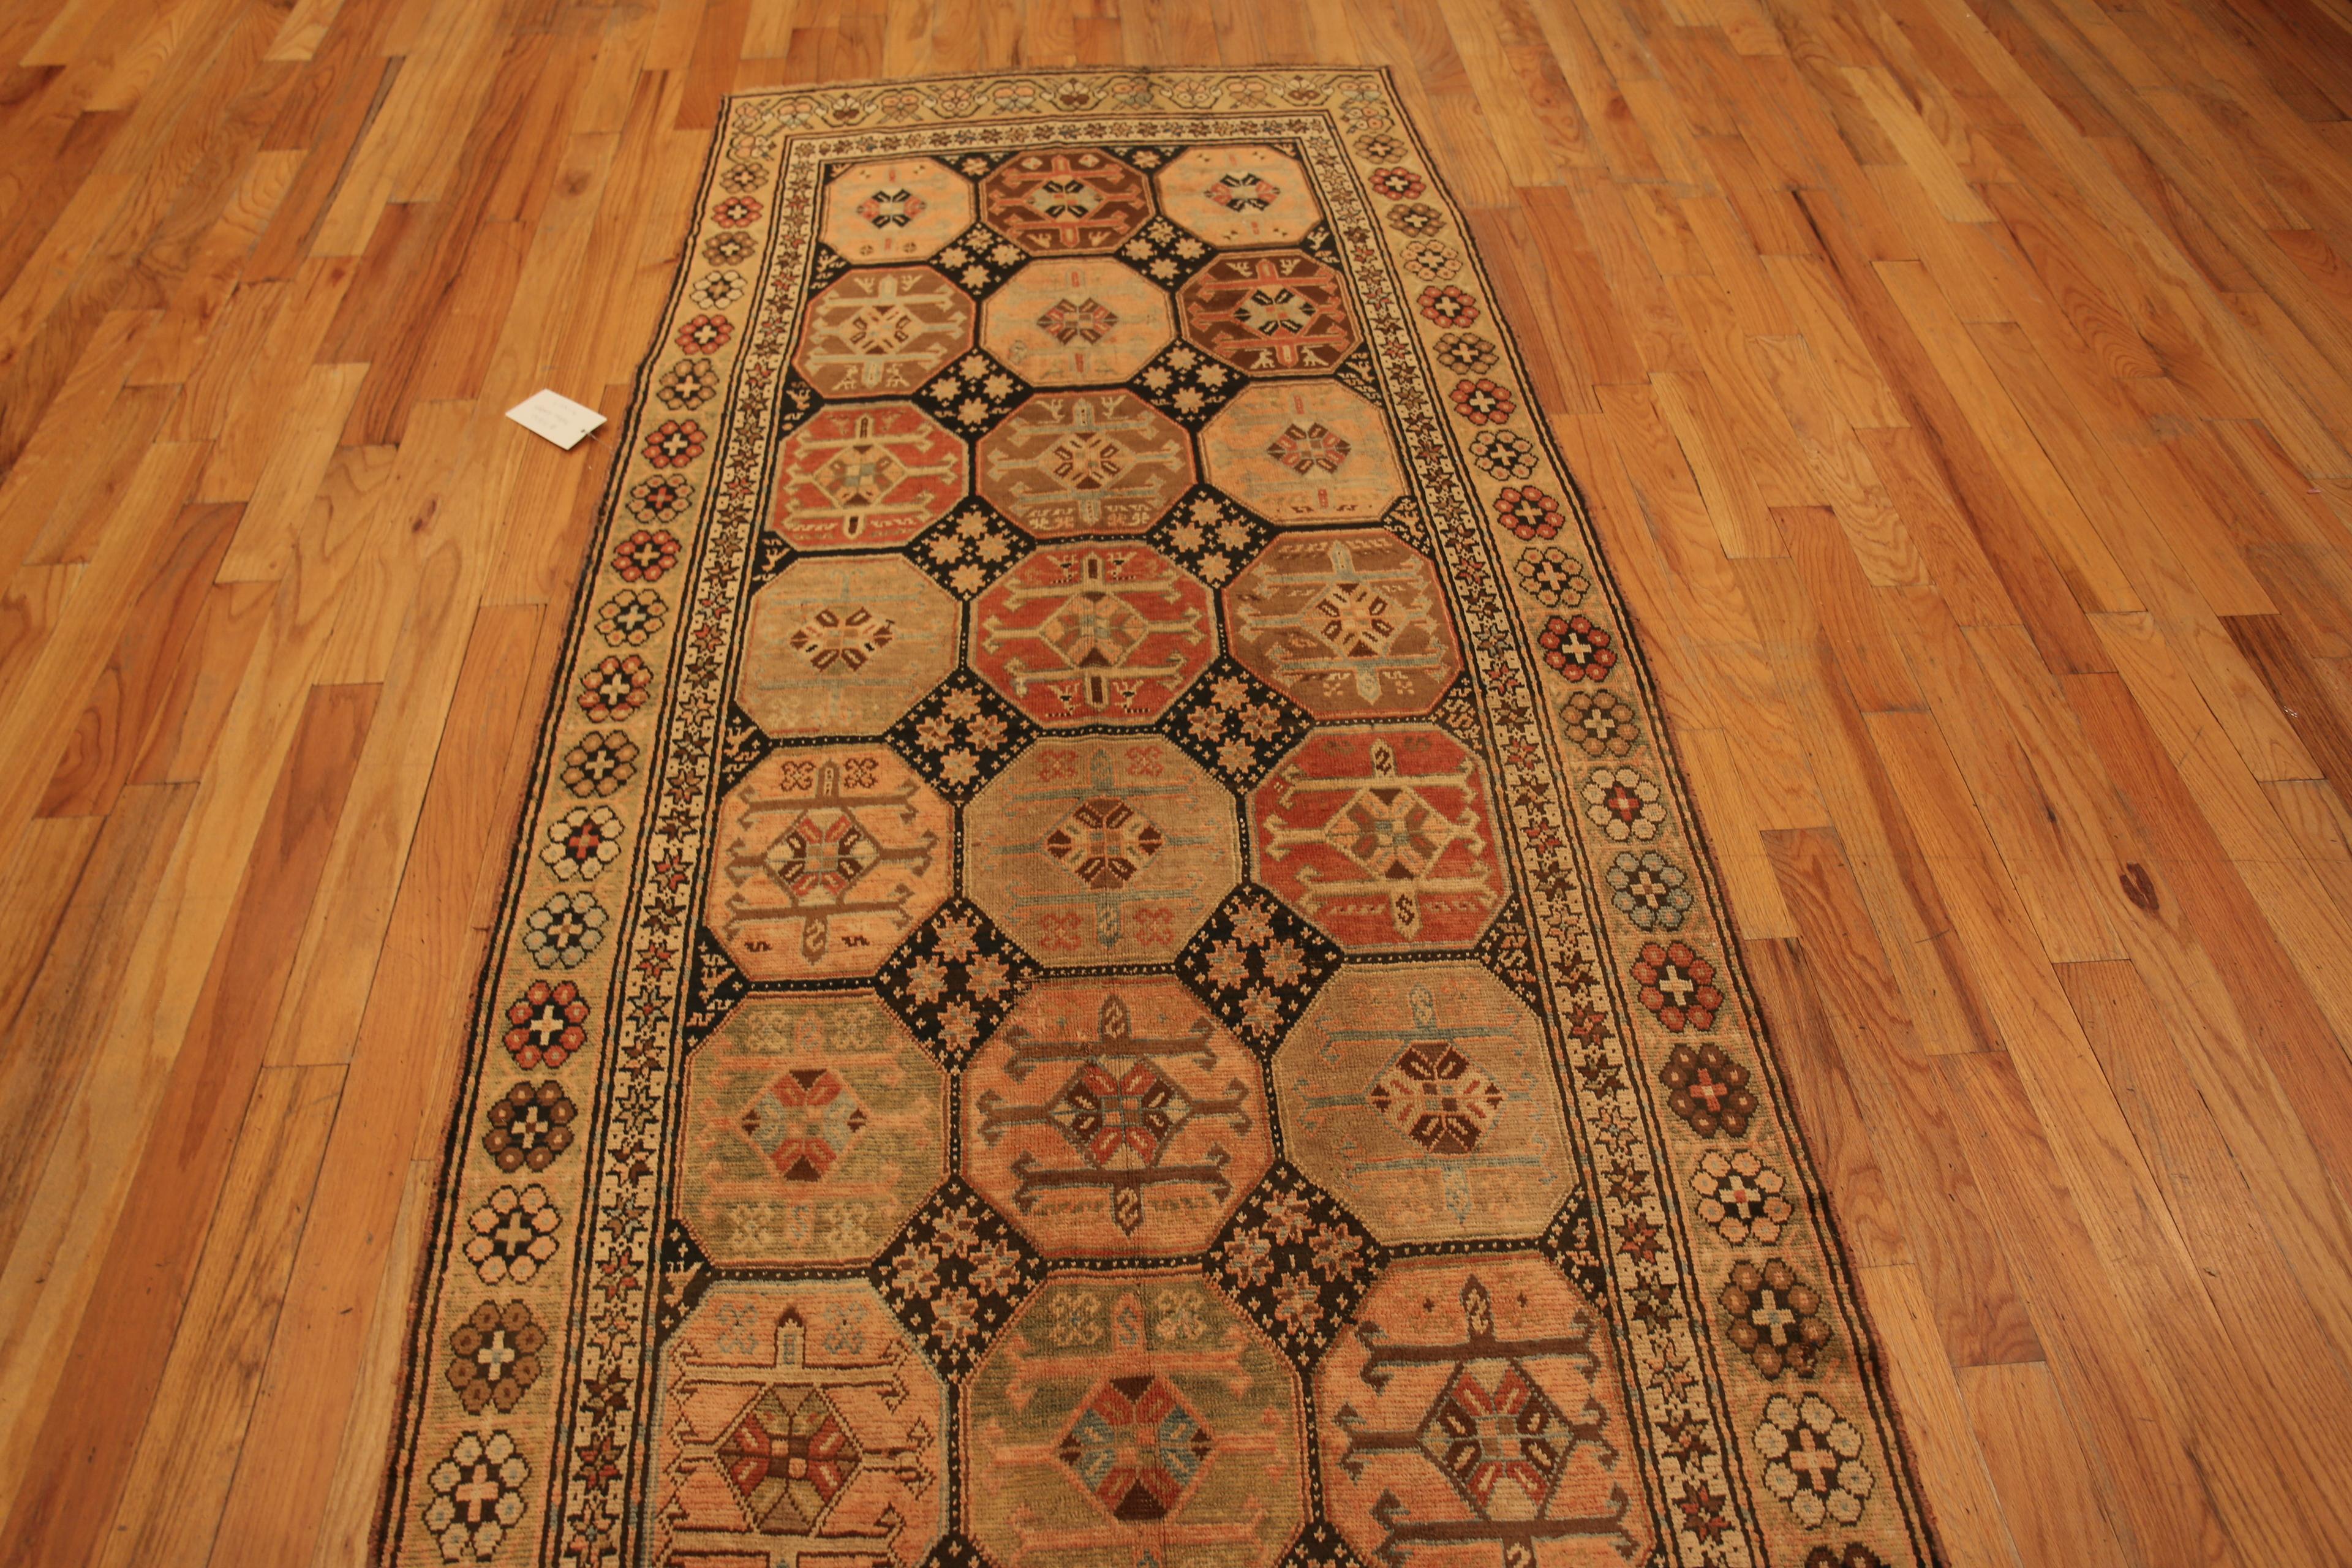 Nazmiyal Collection Antique Caucasian Karabagh Runner Rug, Country Of Origin: Caucasus, Circa date: 1900. Size: 4 ft 1 in x 11 ft 7 in (1.24 m x 3.53 m)